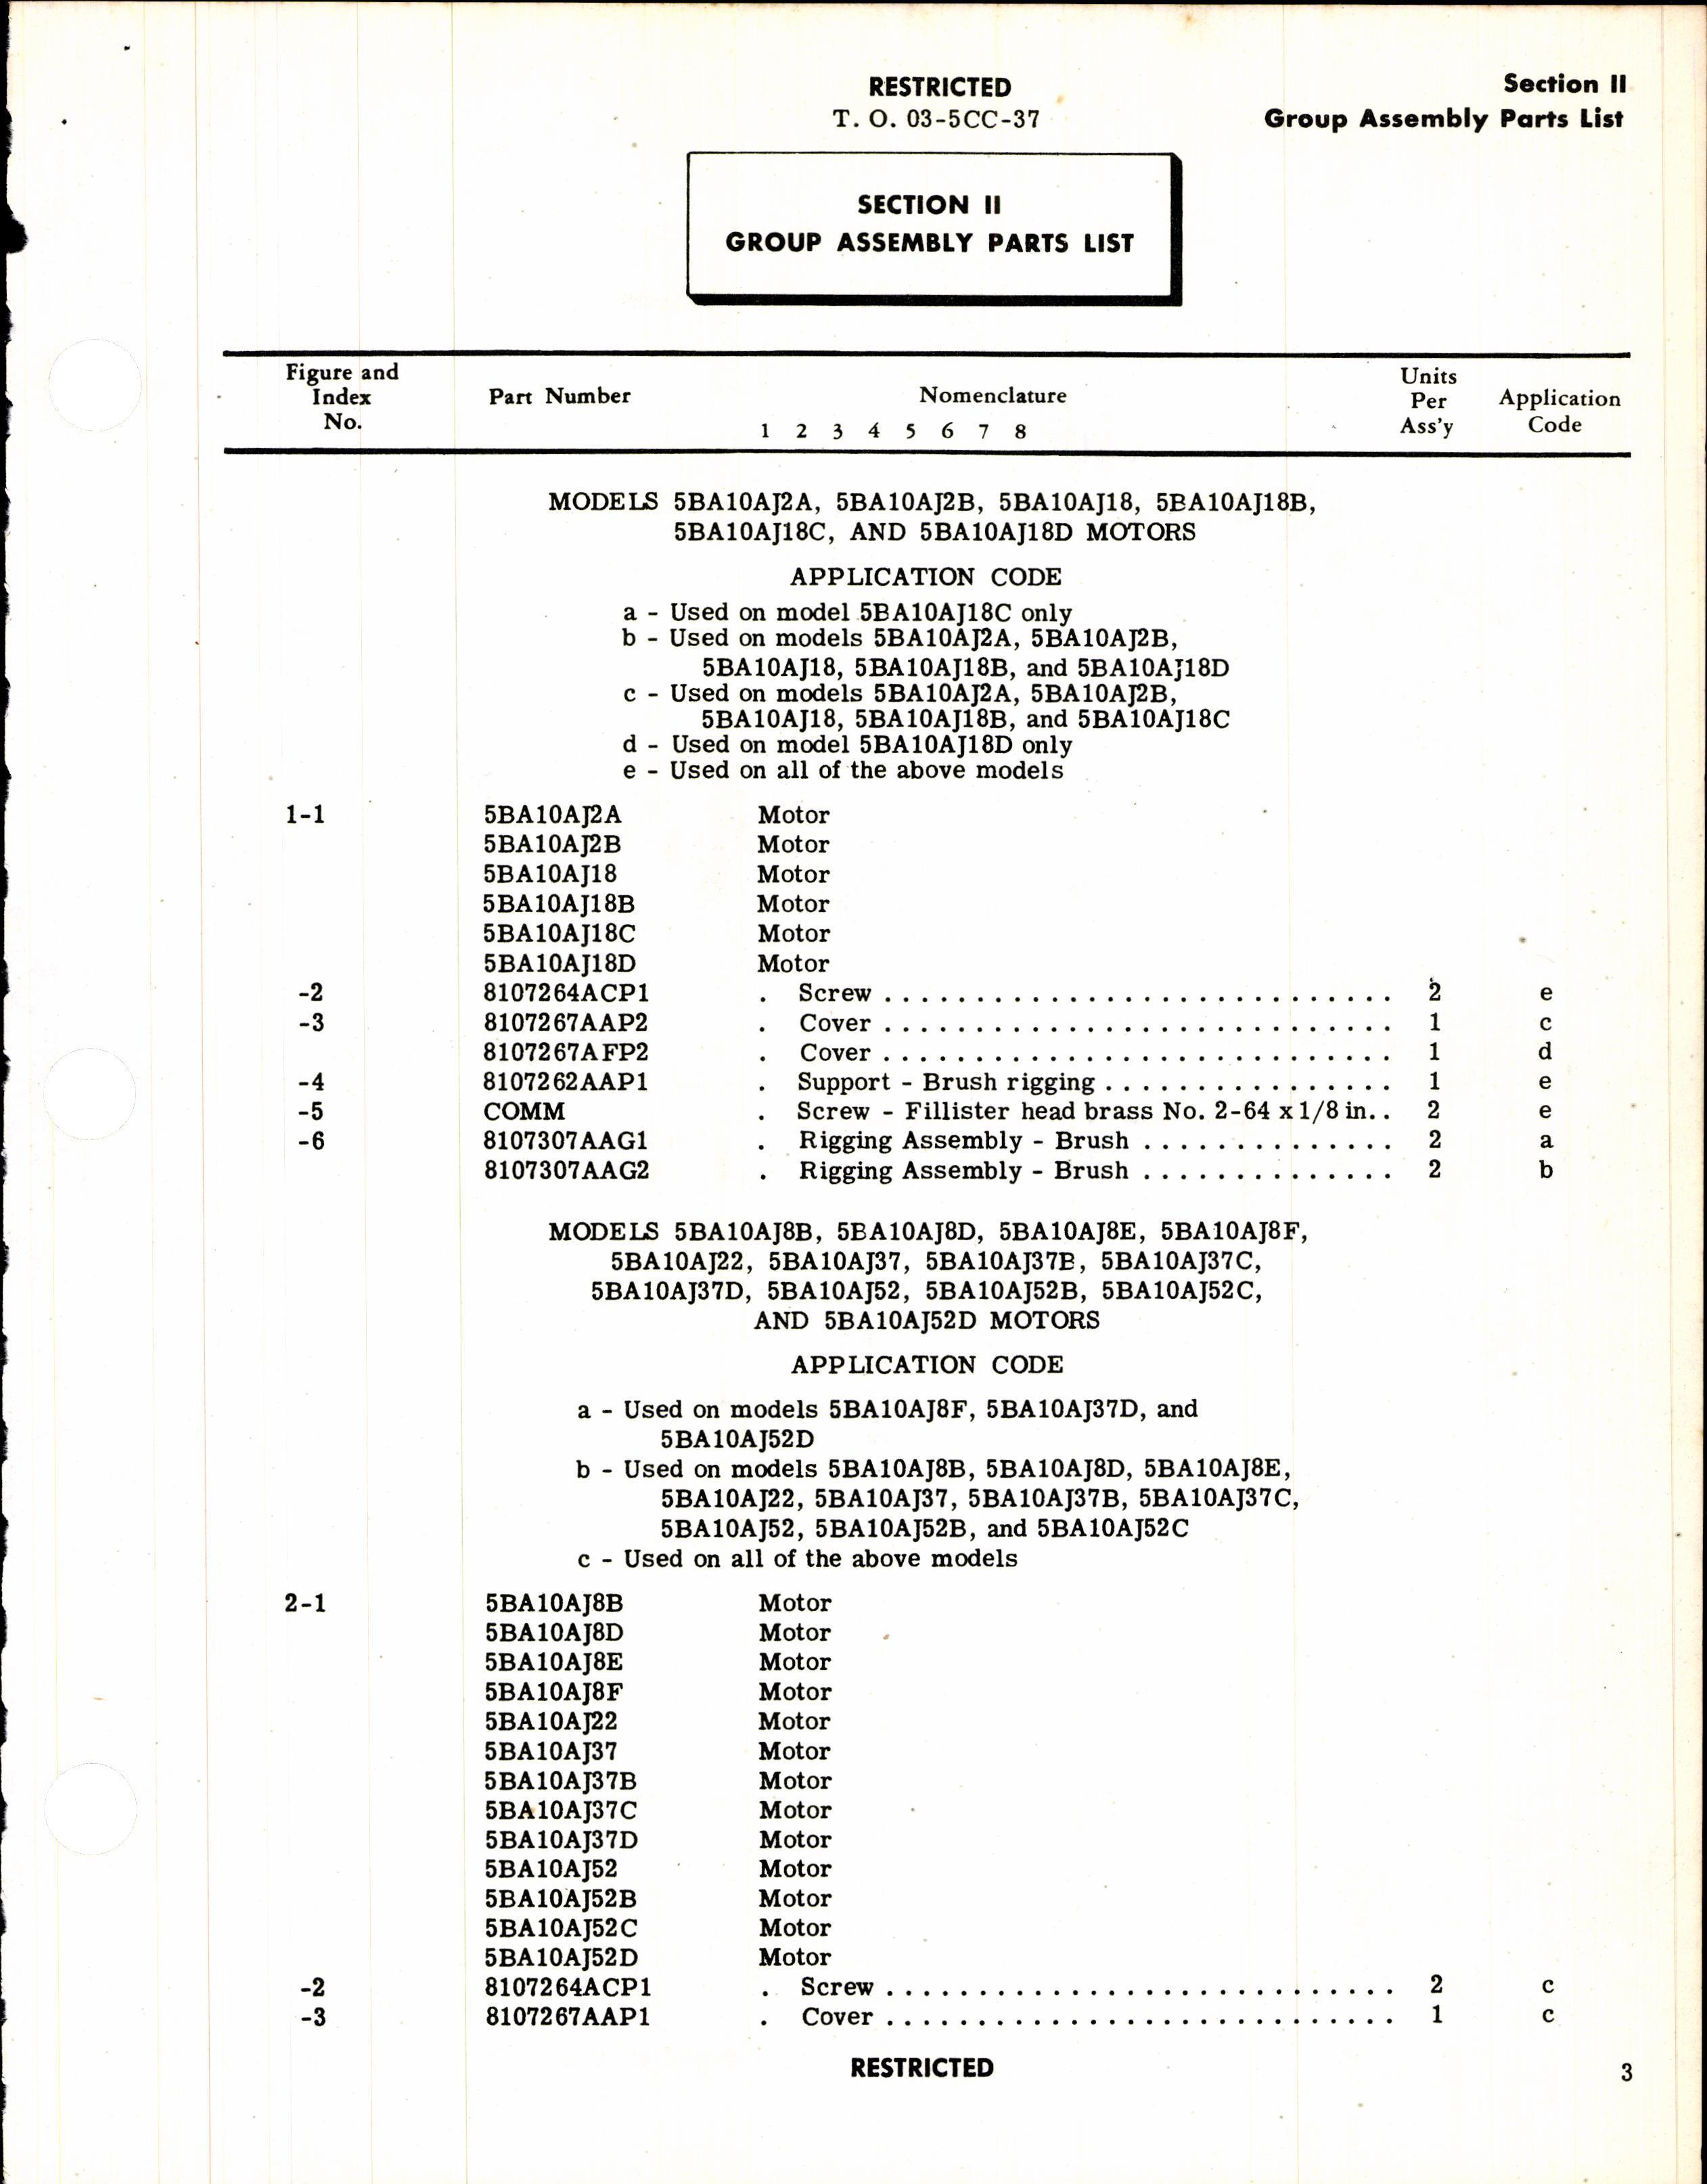 Sample page 5 from AirCorps Library document: Parts Catalog for General Electric Series 5BA10 Aircraft Motor